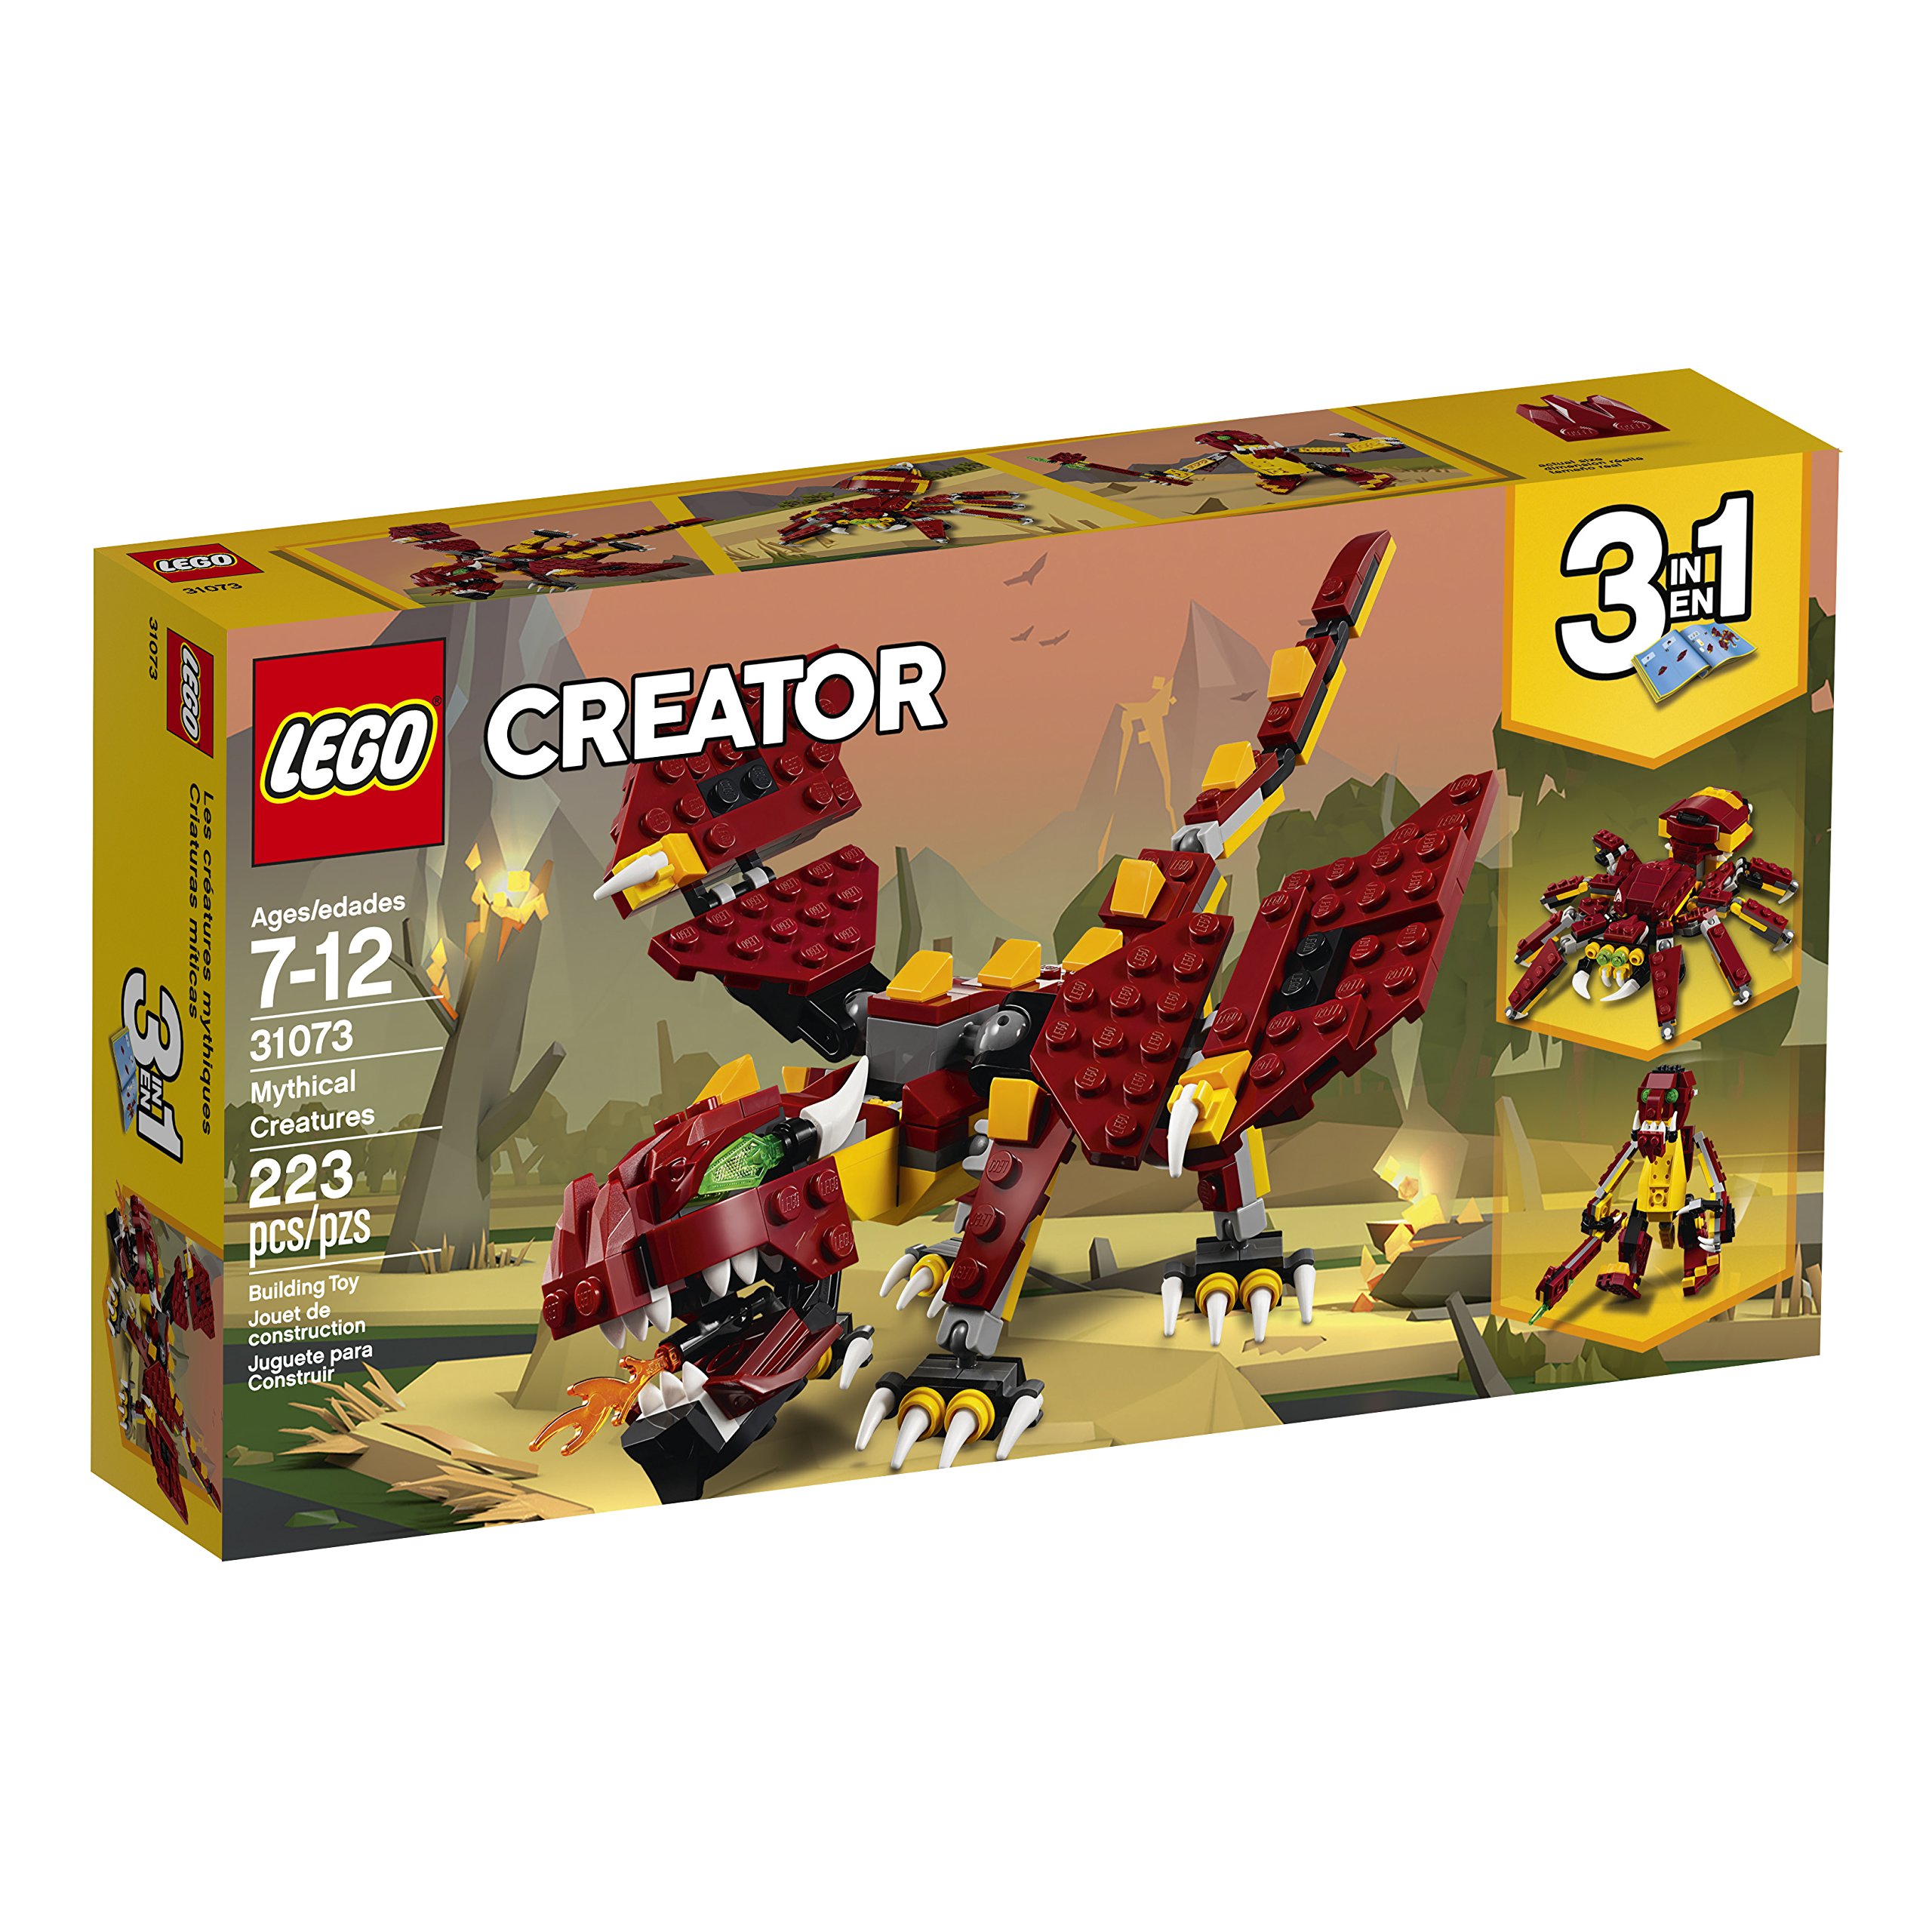 LEGO Creator 3in1 Mythical Creatures 31073 Building Kit (223 Pieces) (Discontinued by Manufacturer)